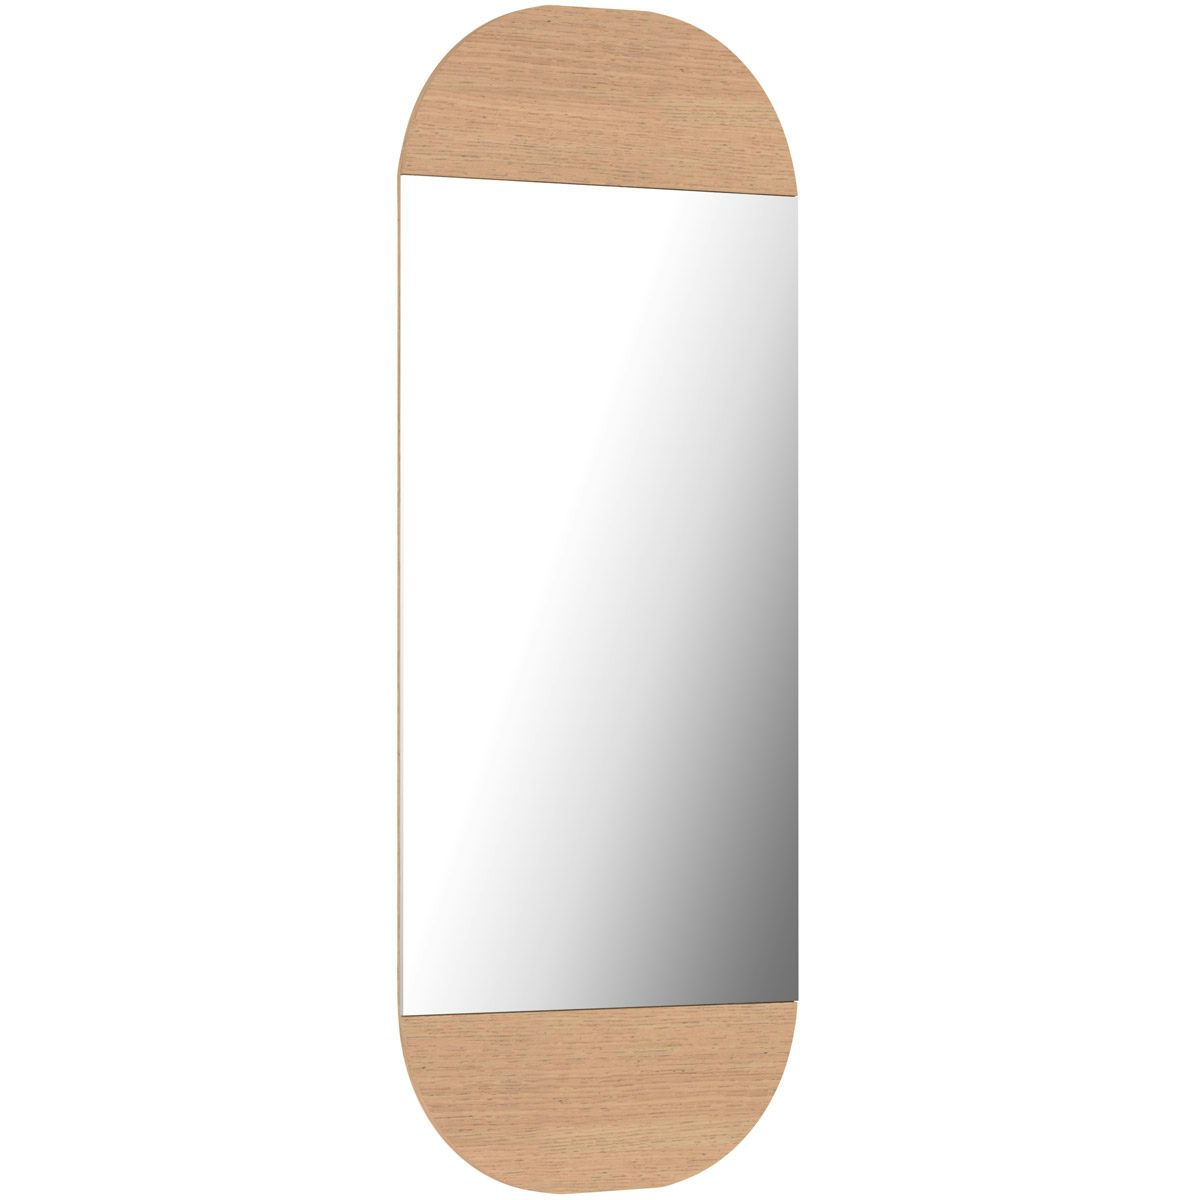 Accents Lund wall mirror